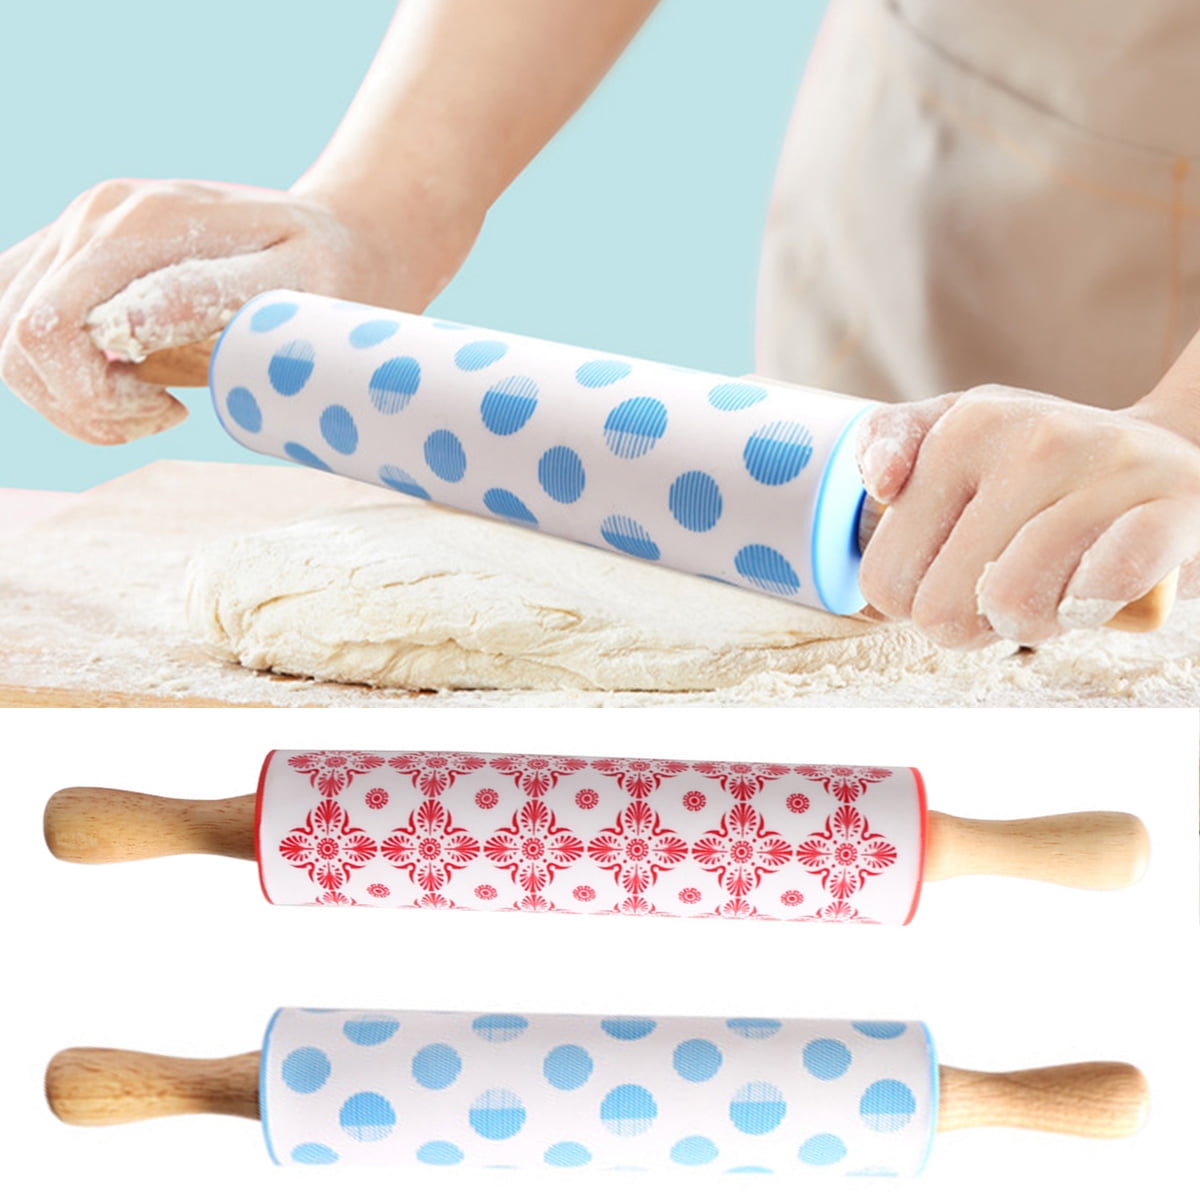 ✨ The Pioneer Woman Floral Ceramic Rolling Pin with Wood Base Stand Gorgeous ✨ 